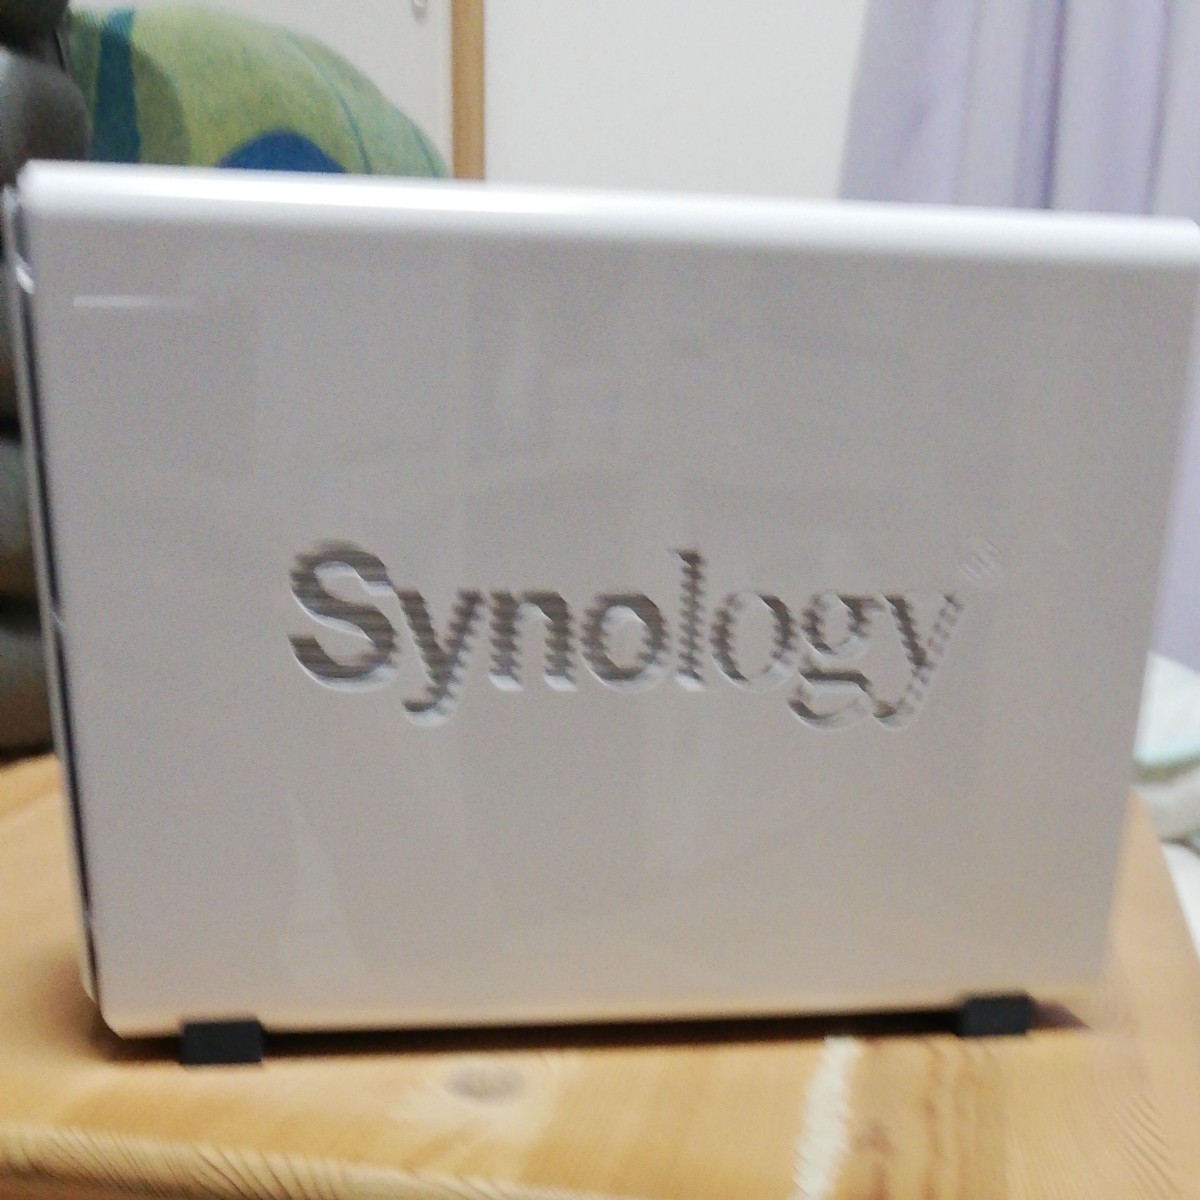 Synology NAS ds115j